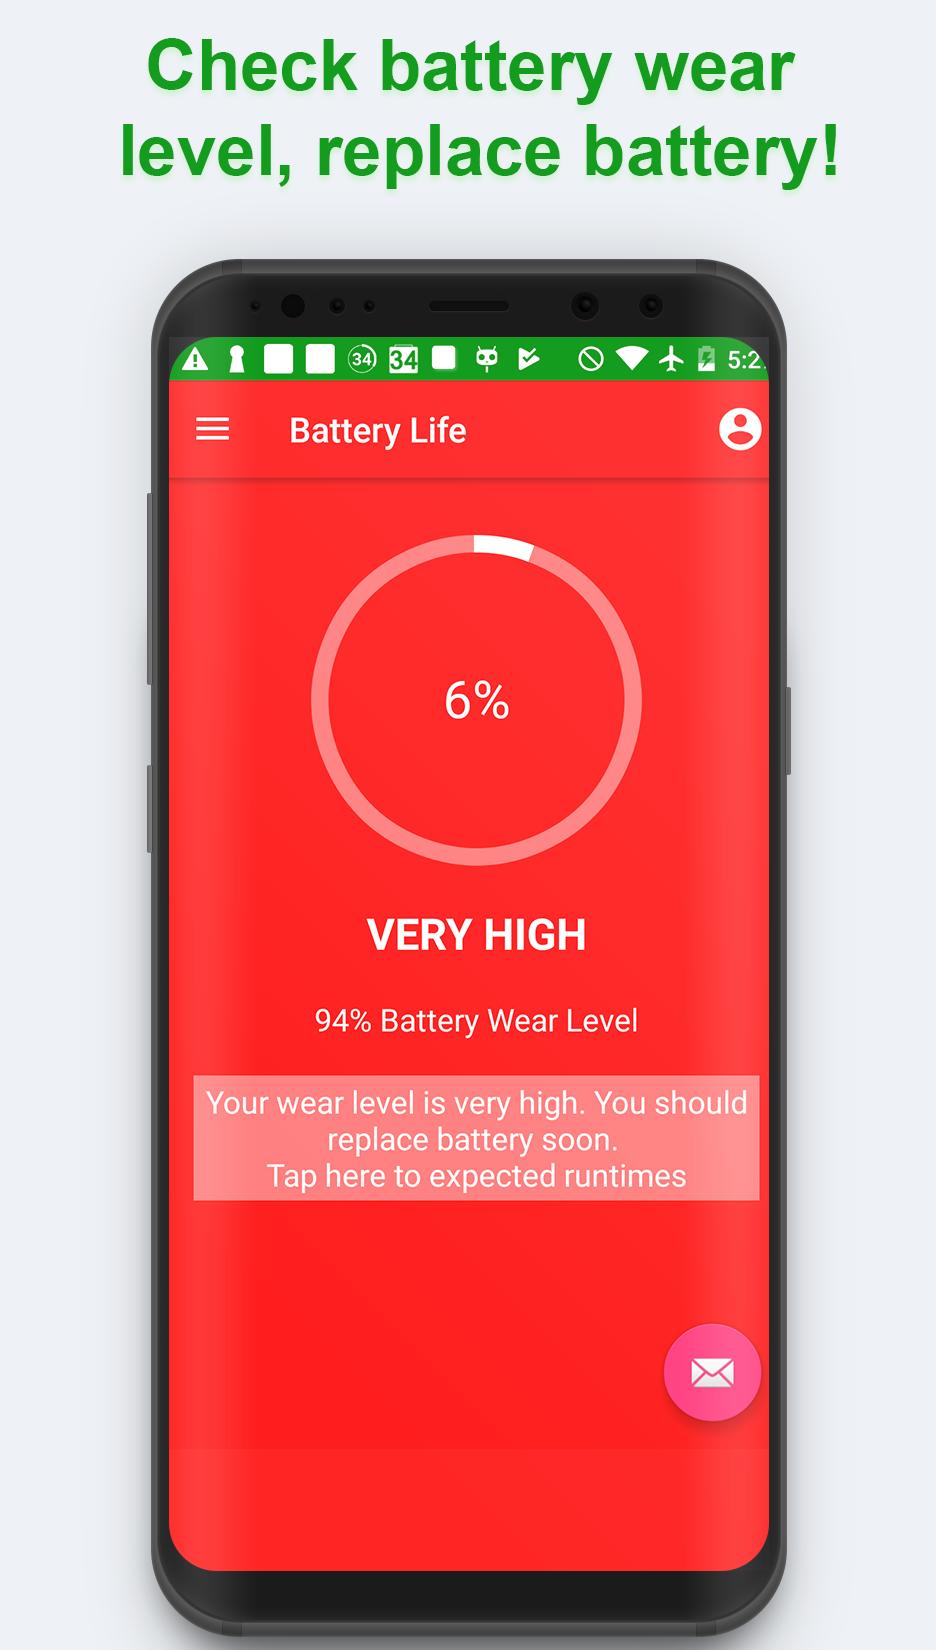 Battery life - Battery wear check! for Android - APK Download